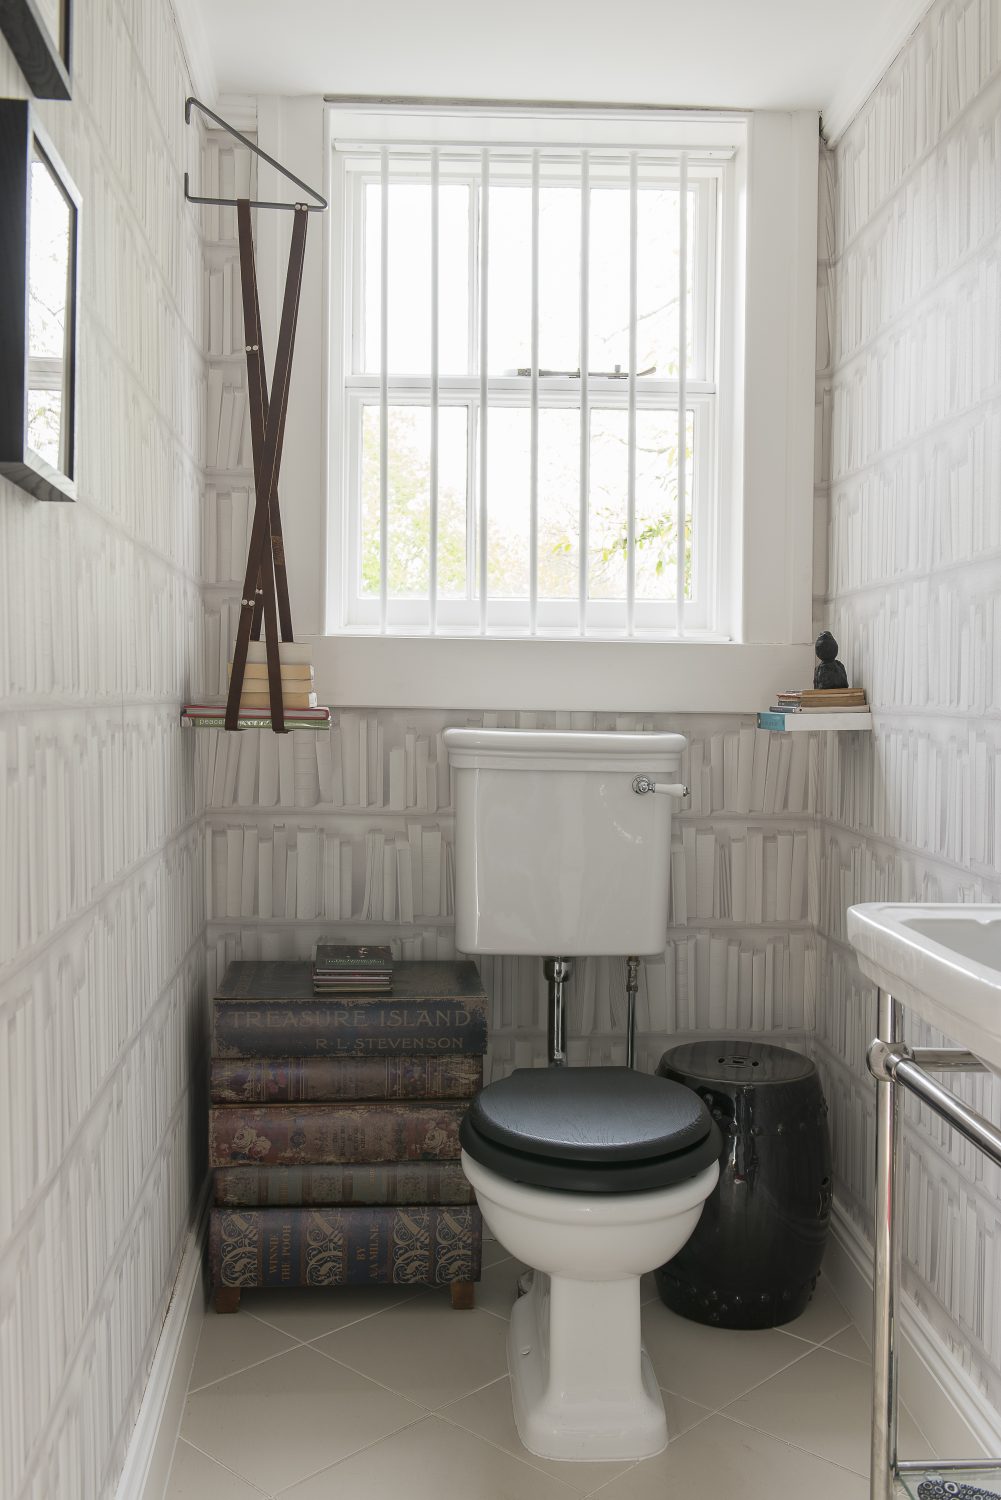 The ‘Library Loo’ featuring a table made of books, book cover art by the Connor Brothers, from Lilford Galleries in Canterbury, hanging books, book wallpaper – and a book that is really a shelf